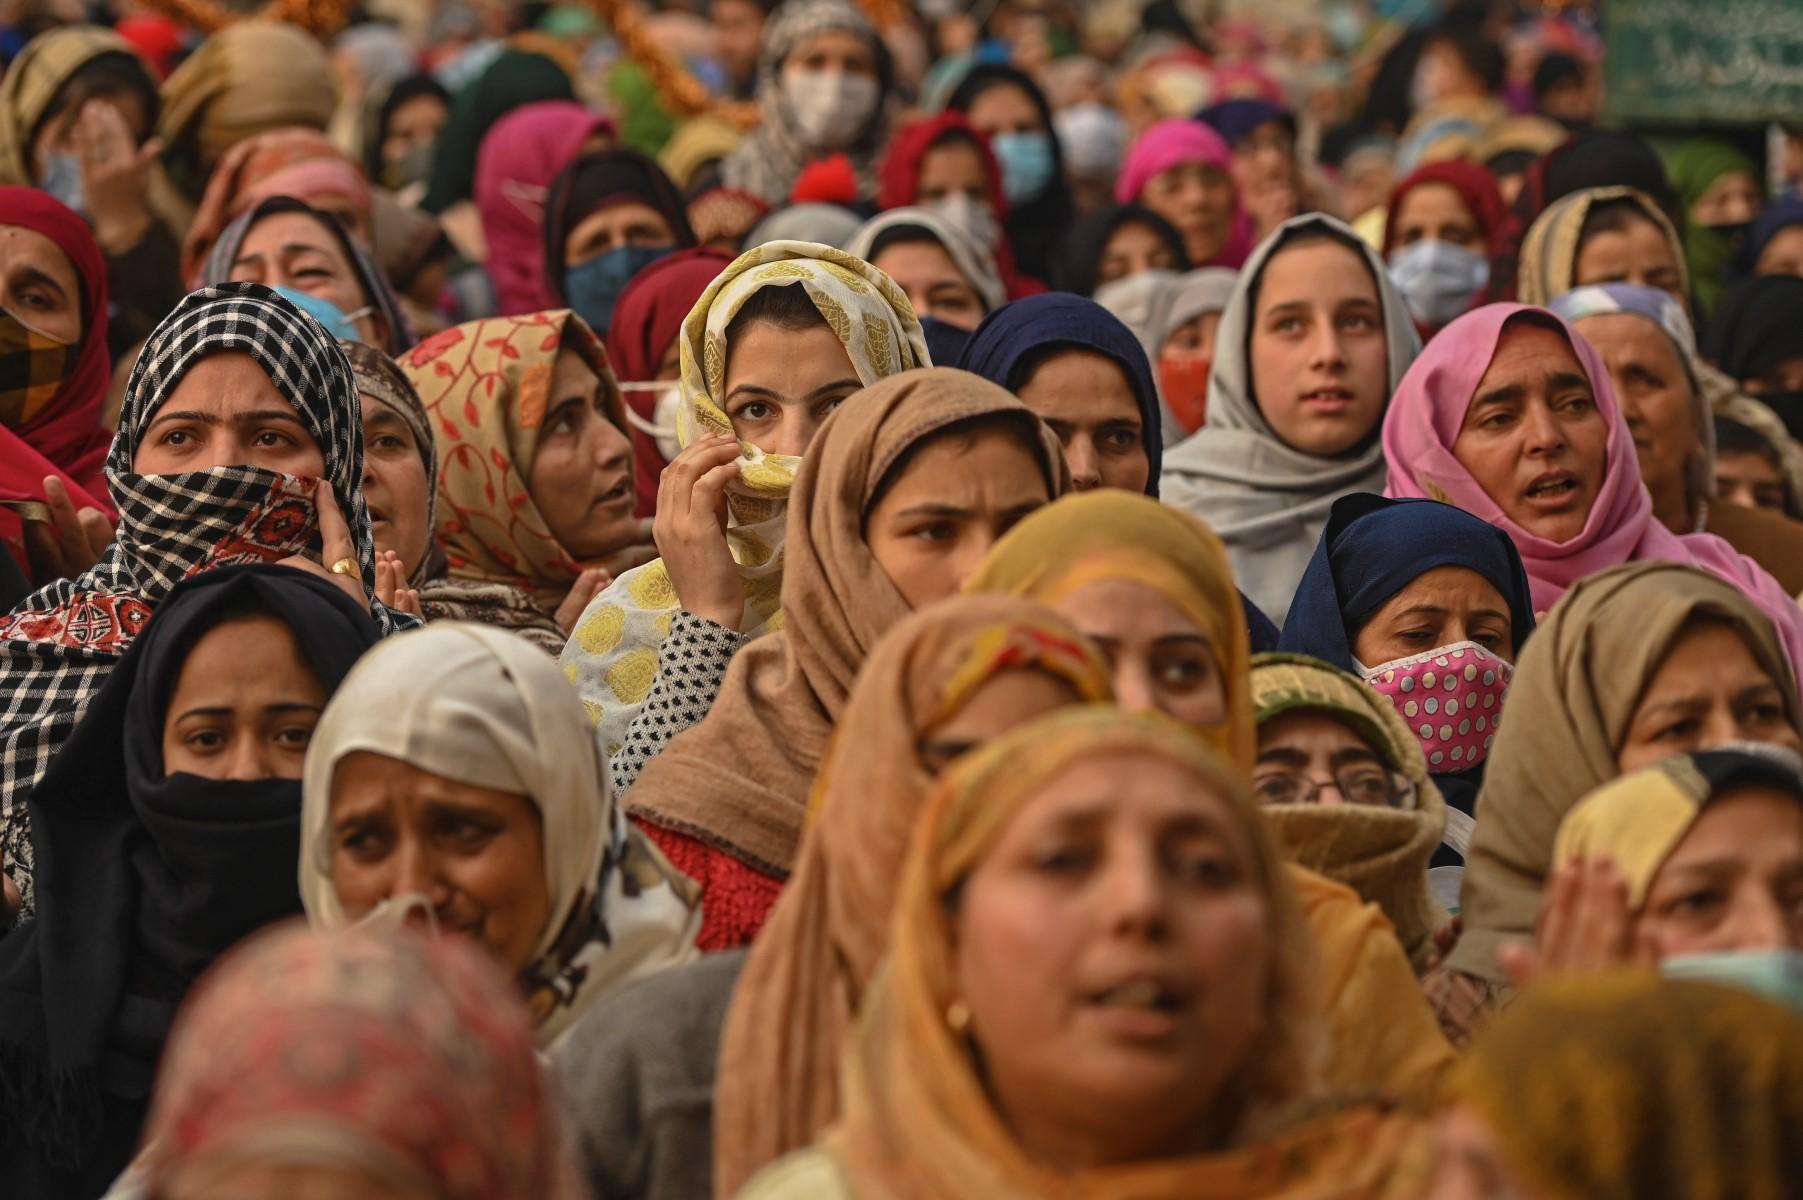 Members of India's Muslim minority have spoken out in recent years about what they feel are growing attempts to target or marginalise their communities. Photo: AFP